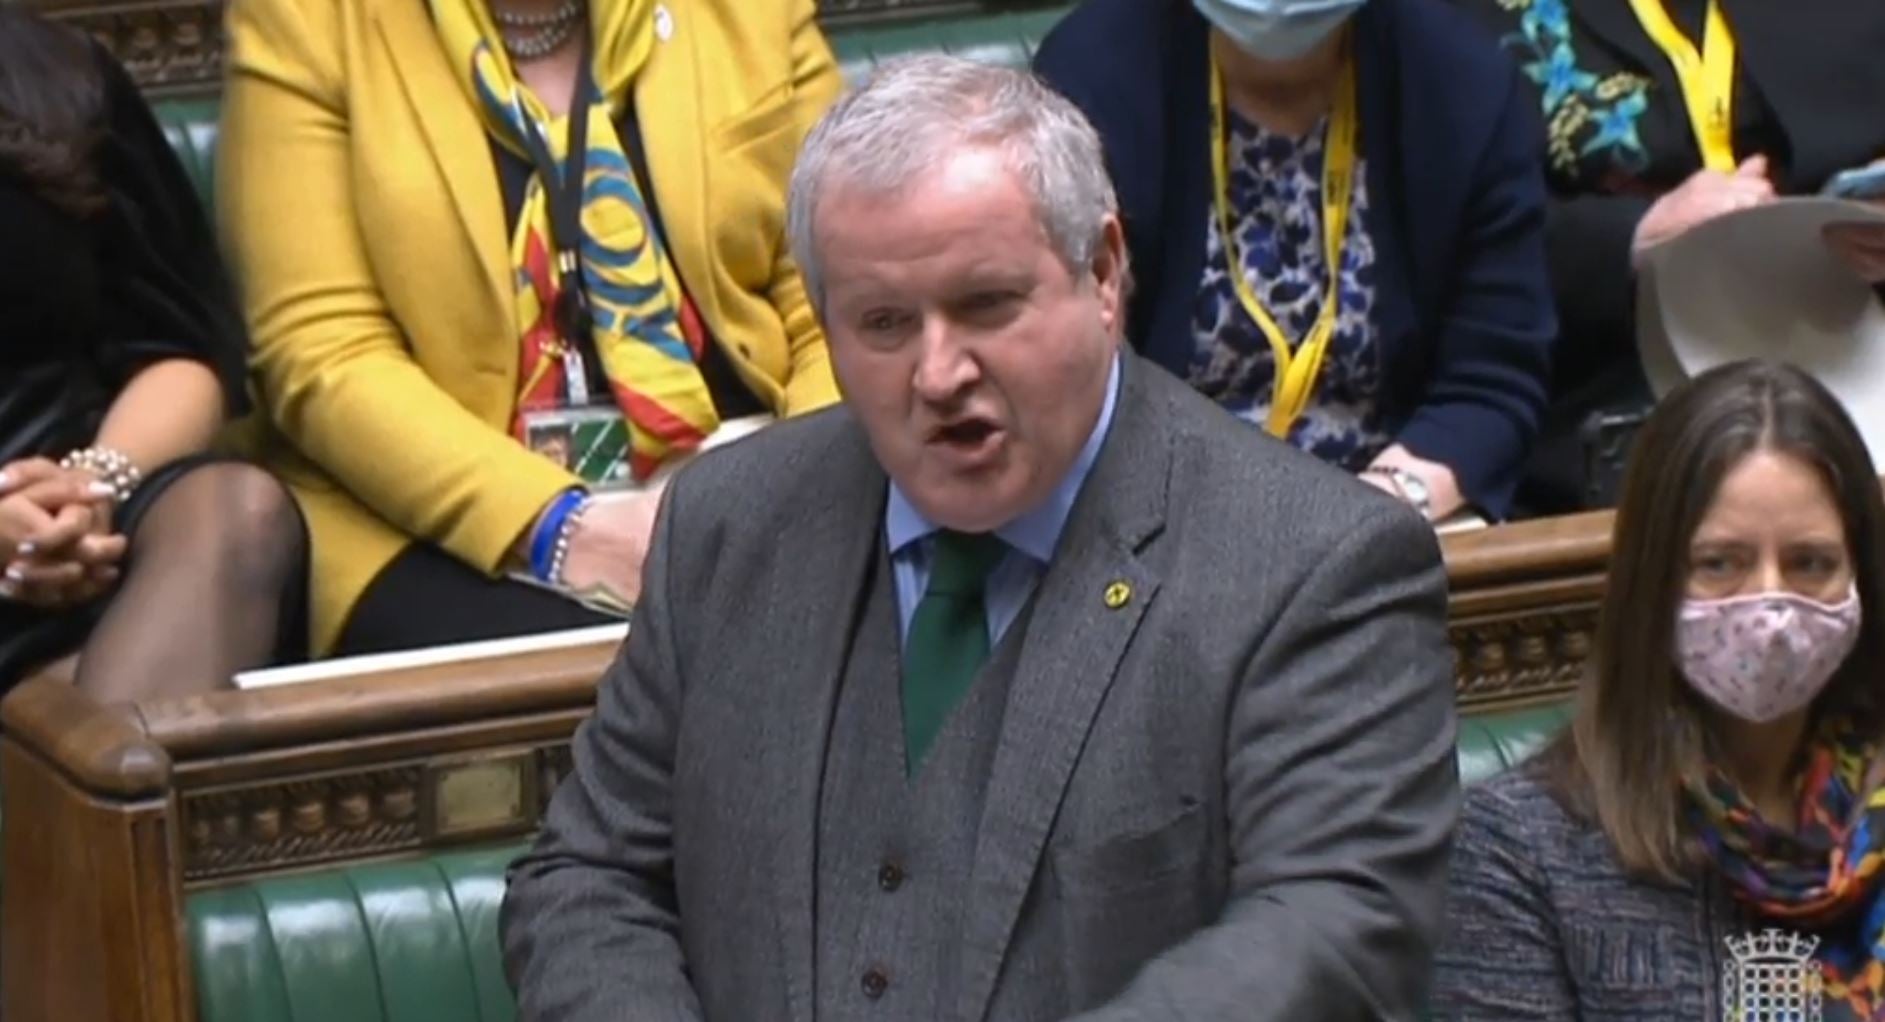 SNP Westminster leader Ian Blackford left the Commons chamber on Monday after accusing Boris Johnson of having ‘wilfully misled’ MPs